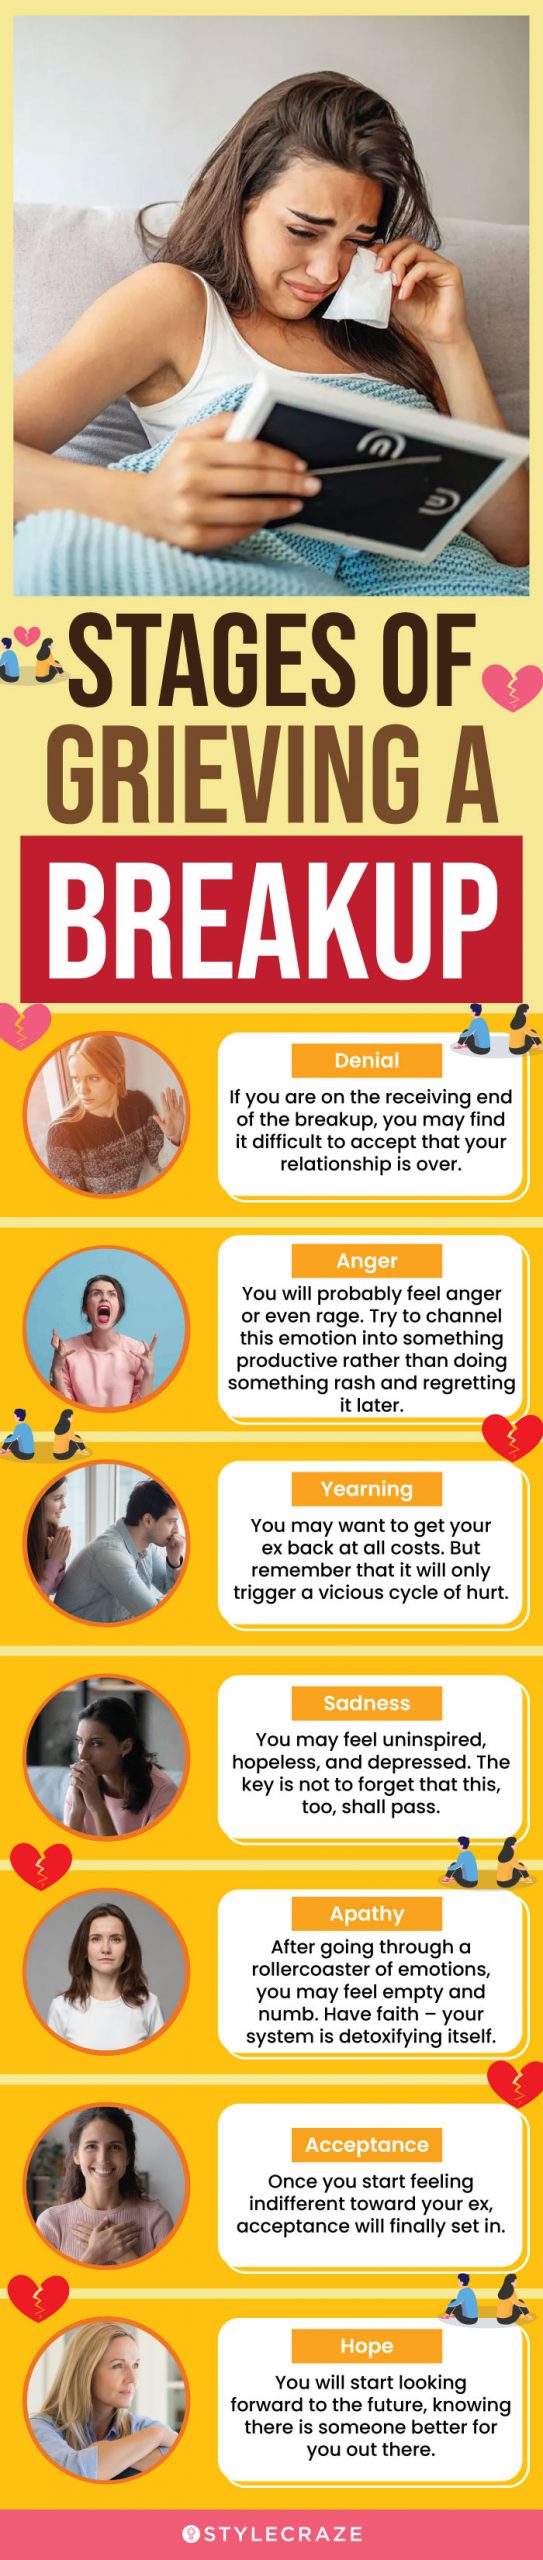 stages of grieving a breakup (infographic)